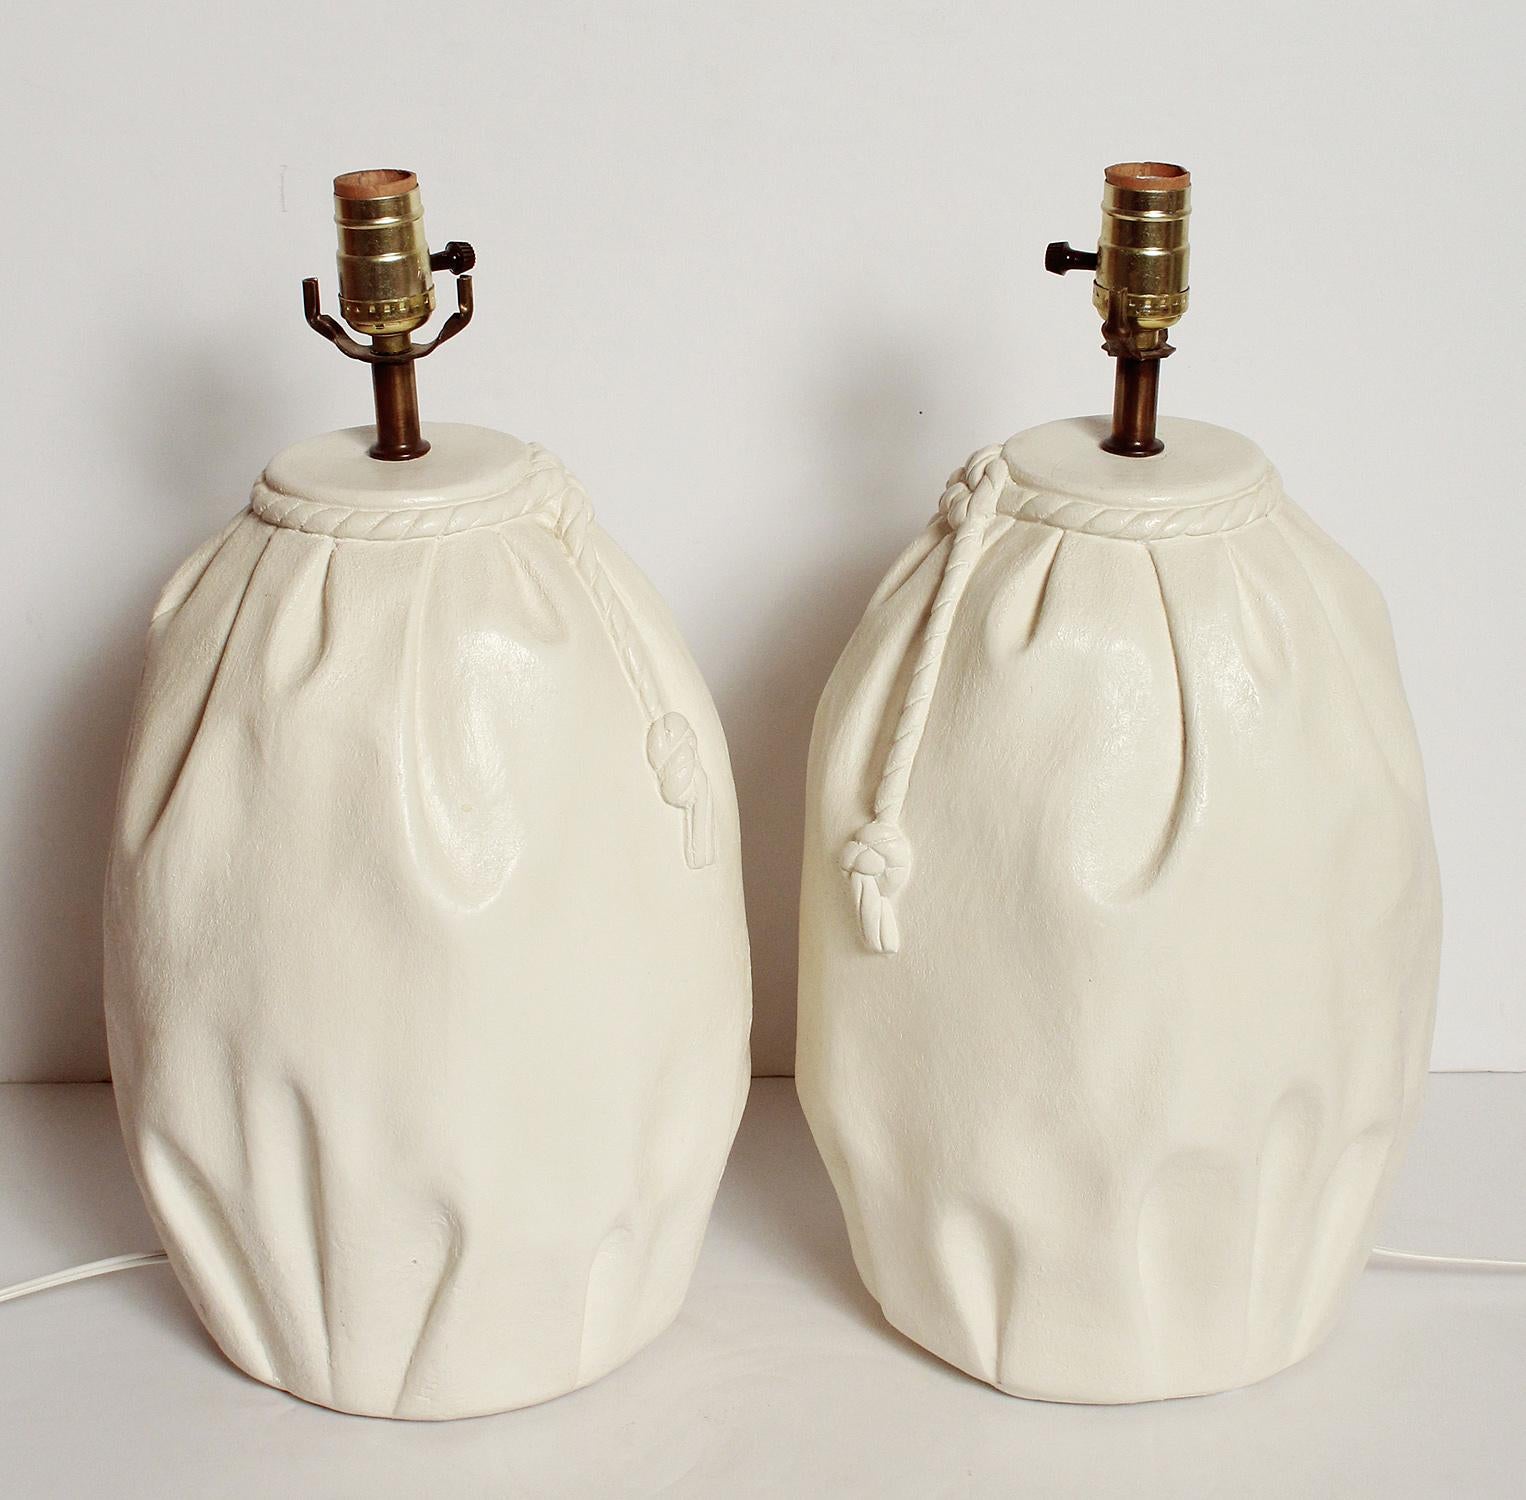 Unusual pair of 1980s plaster lamps in the style of John Dickinson.
Made to look like a cloth sack with rope.

Very unique.
 